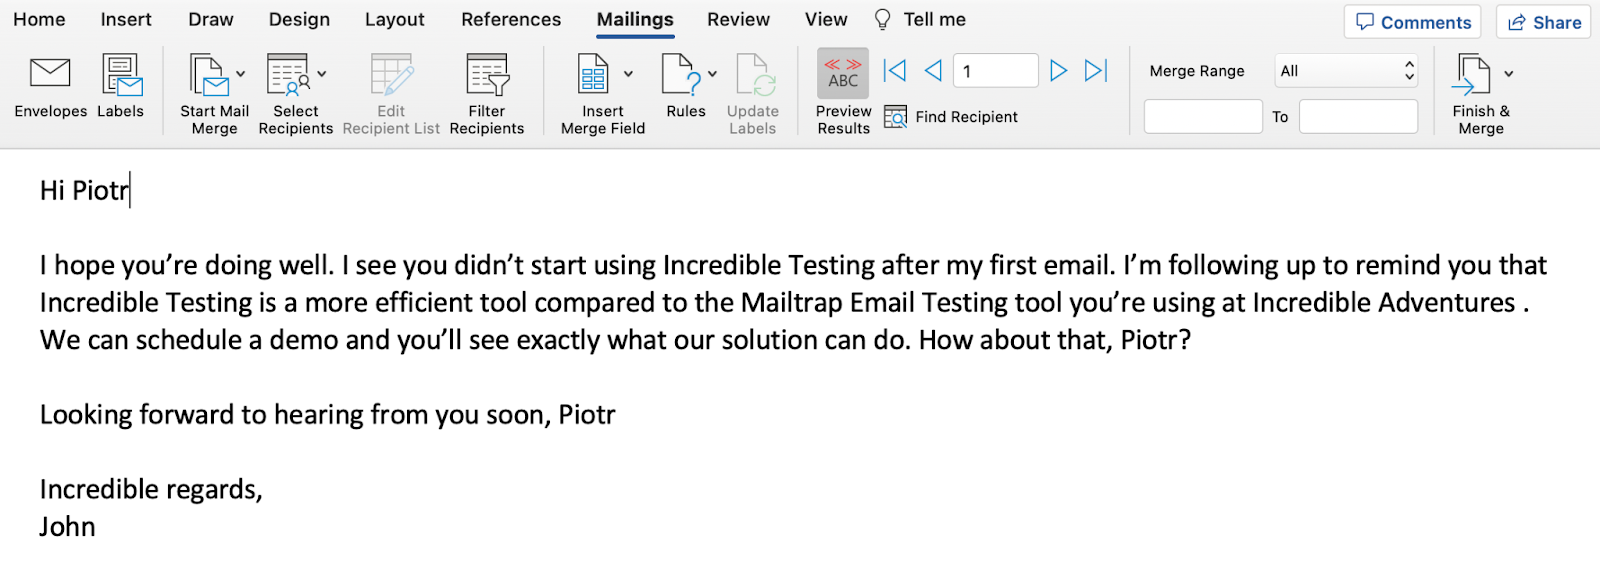 Previewing the mail merge email 